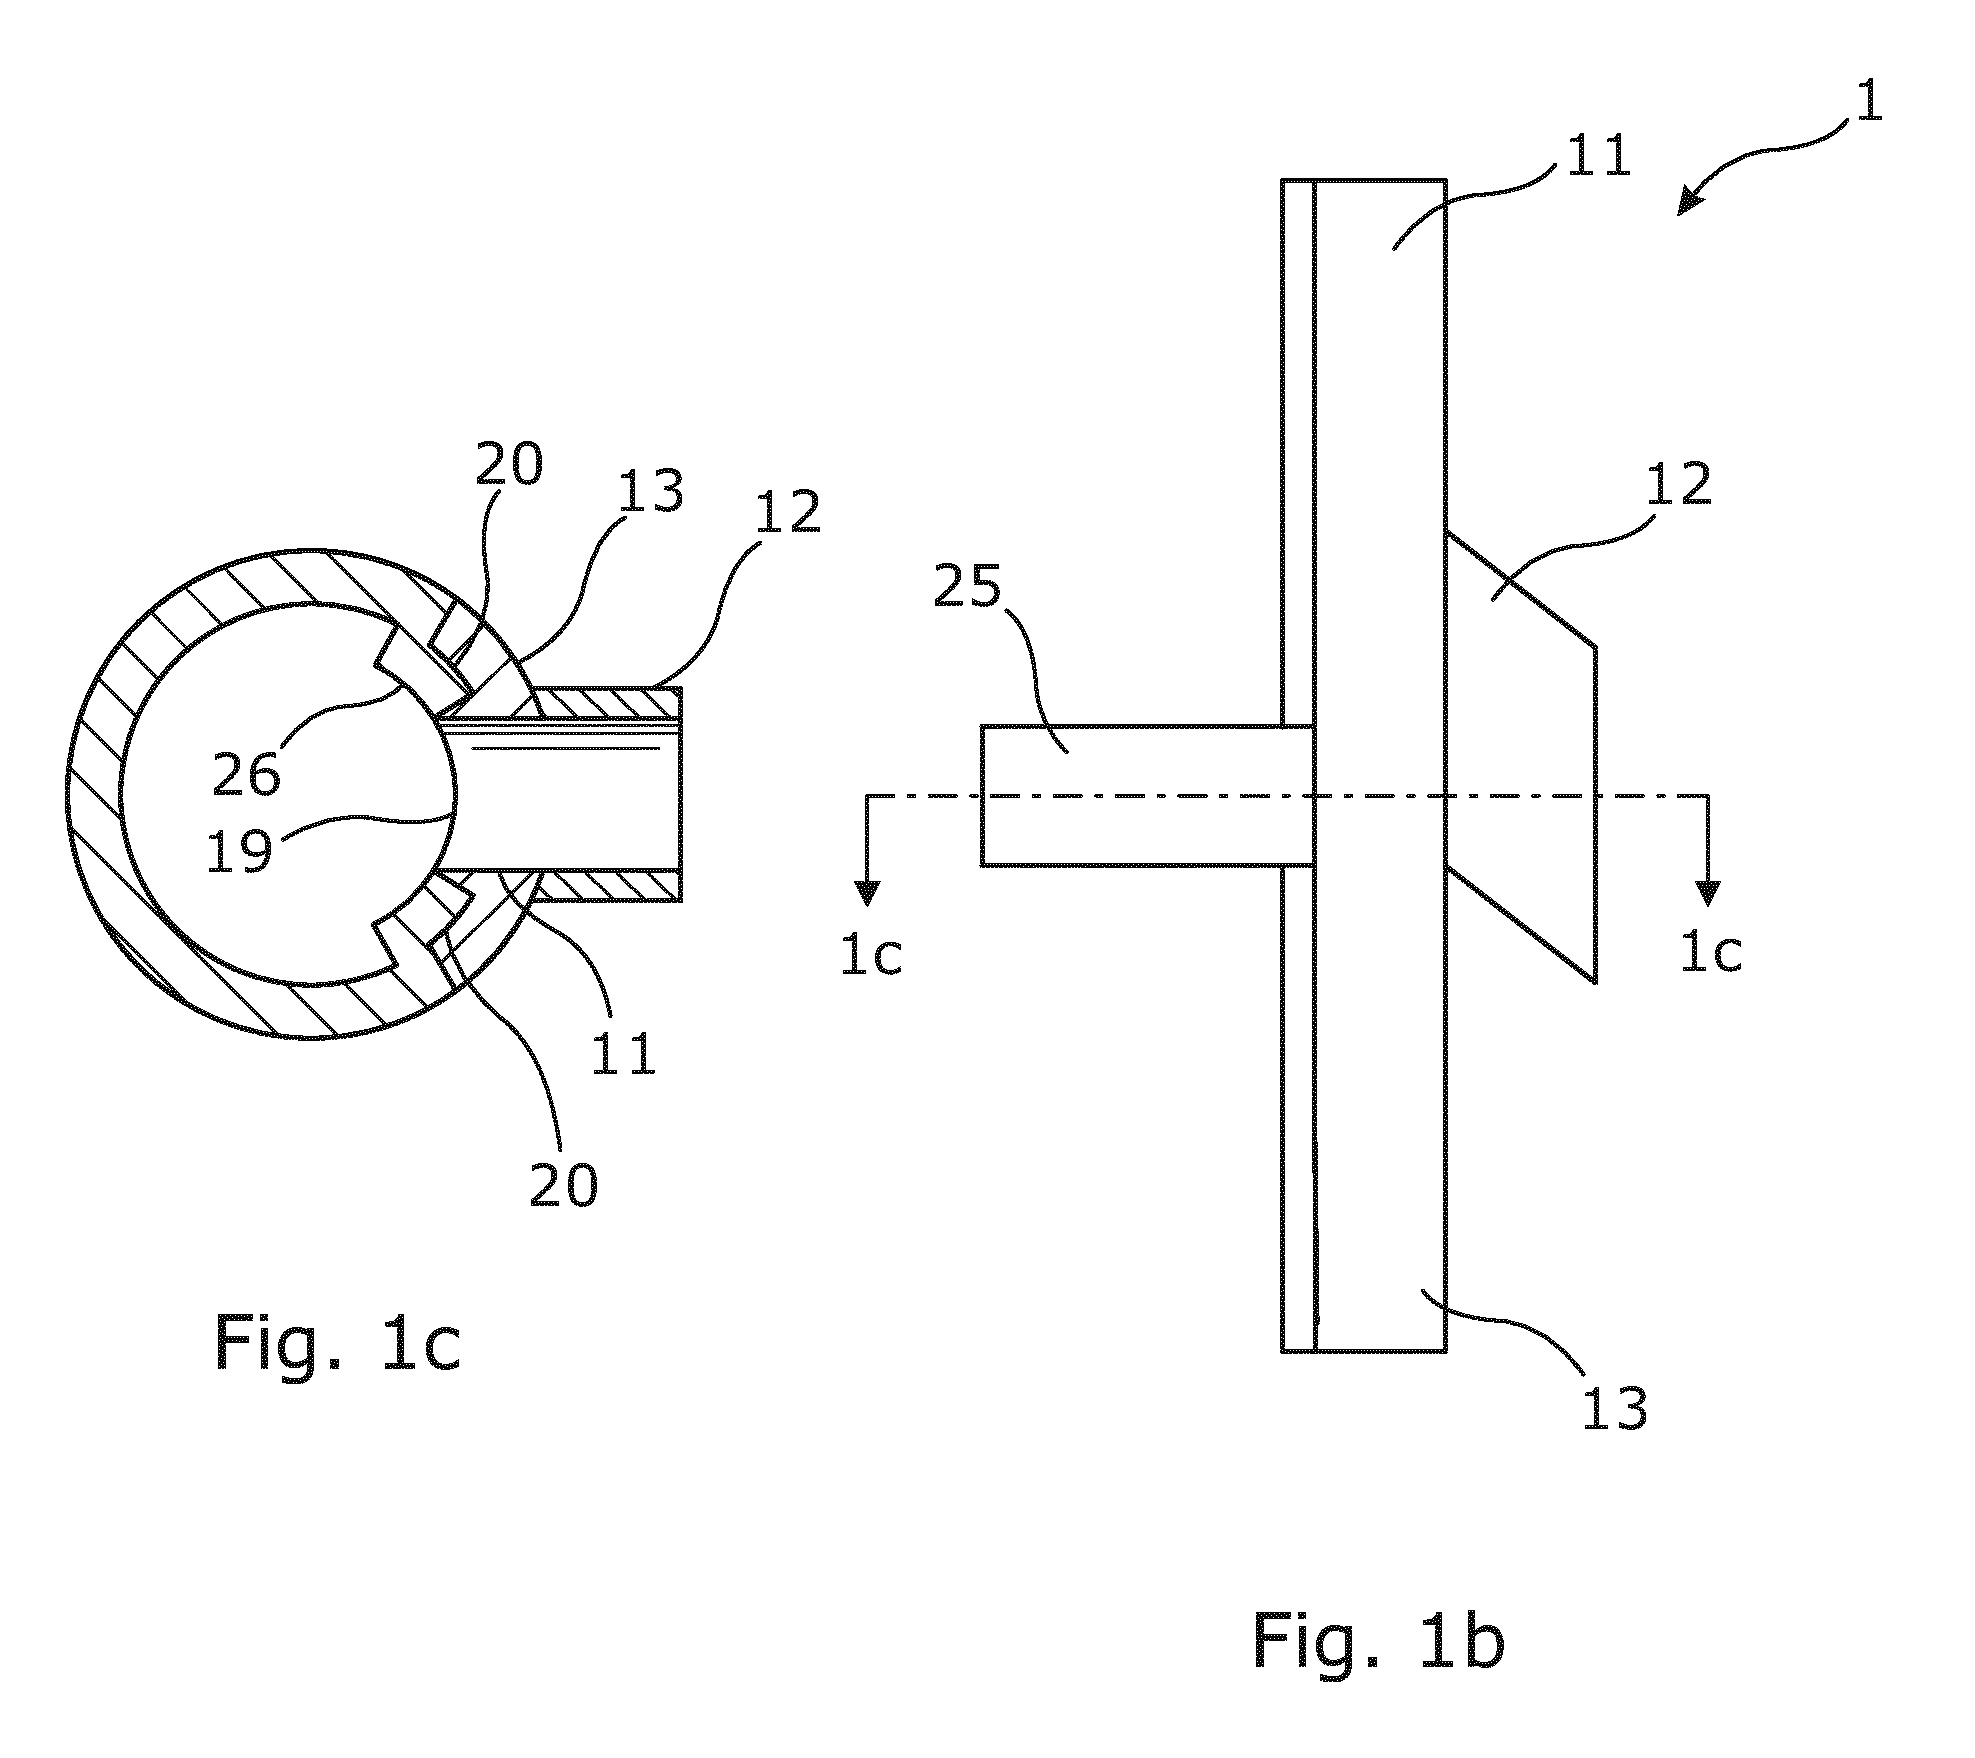 Lateral junction assembly